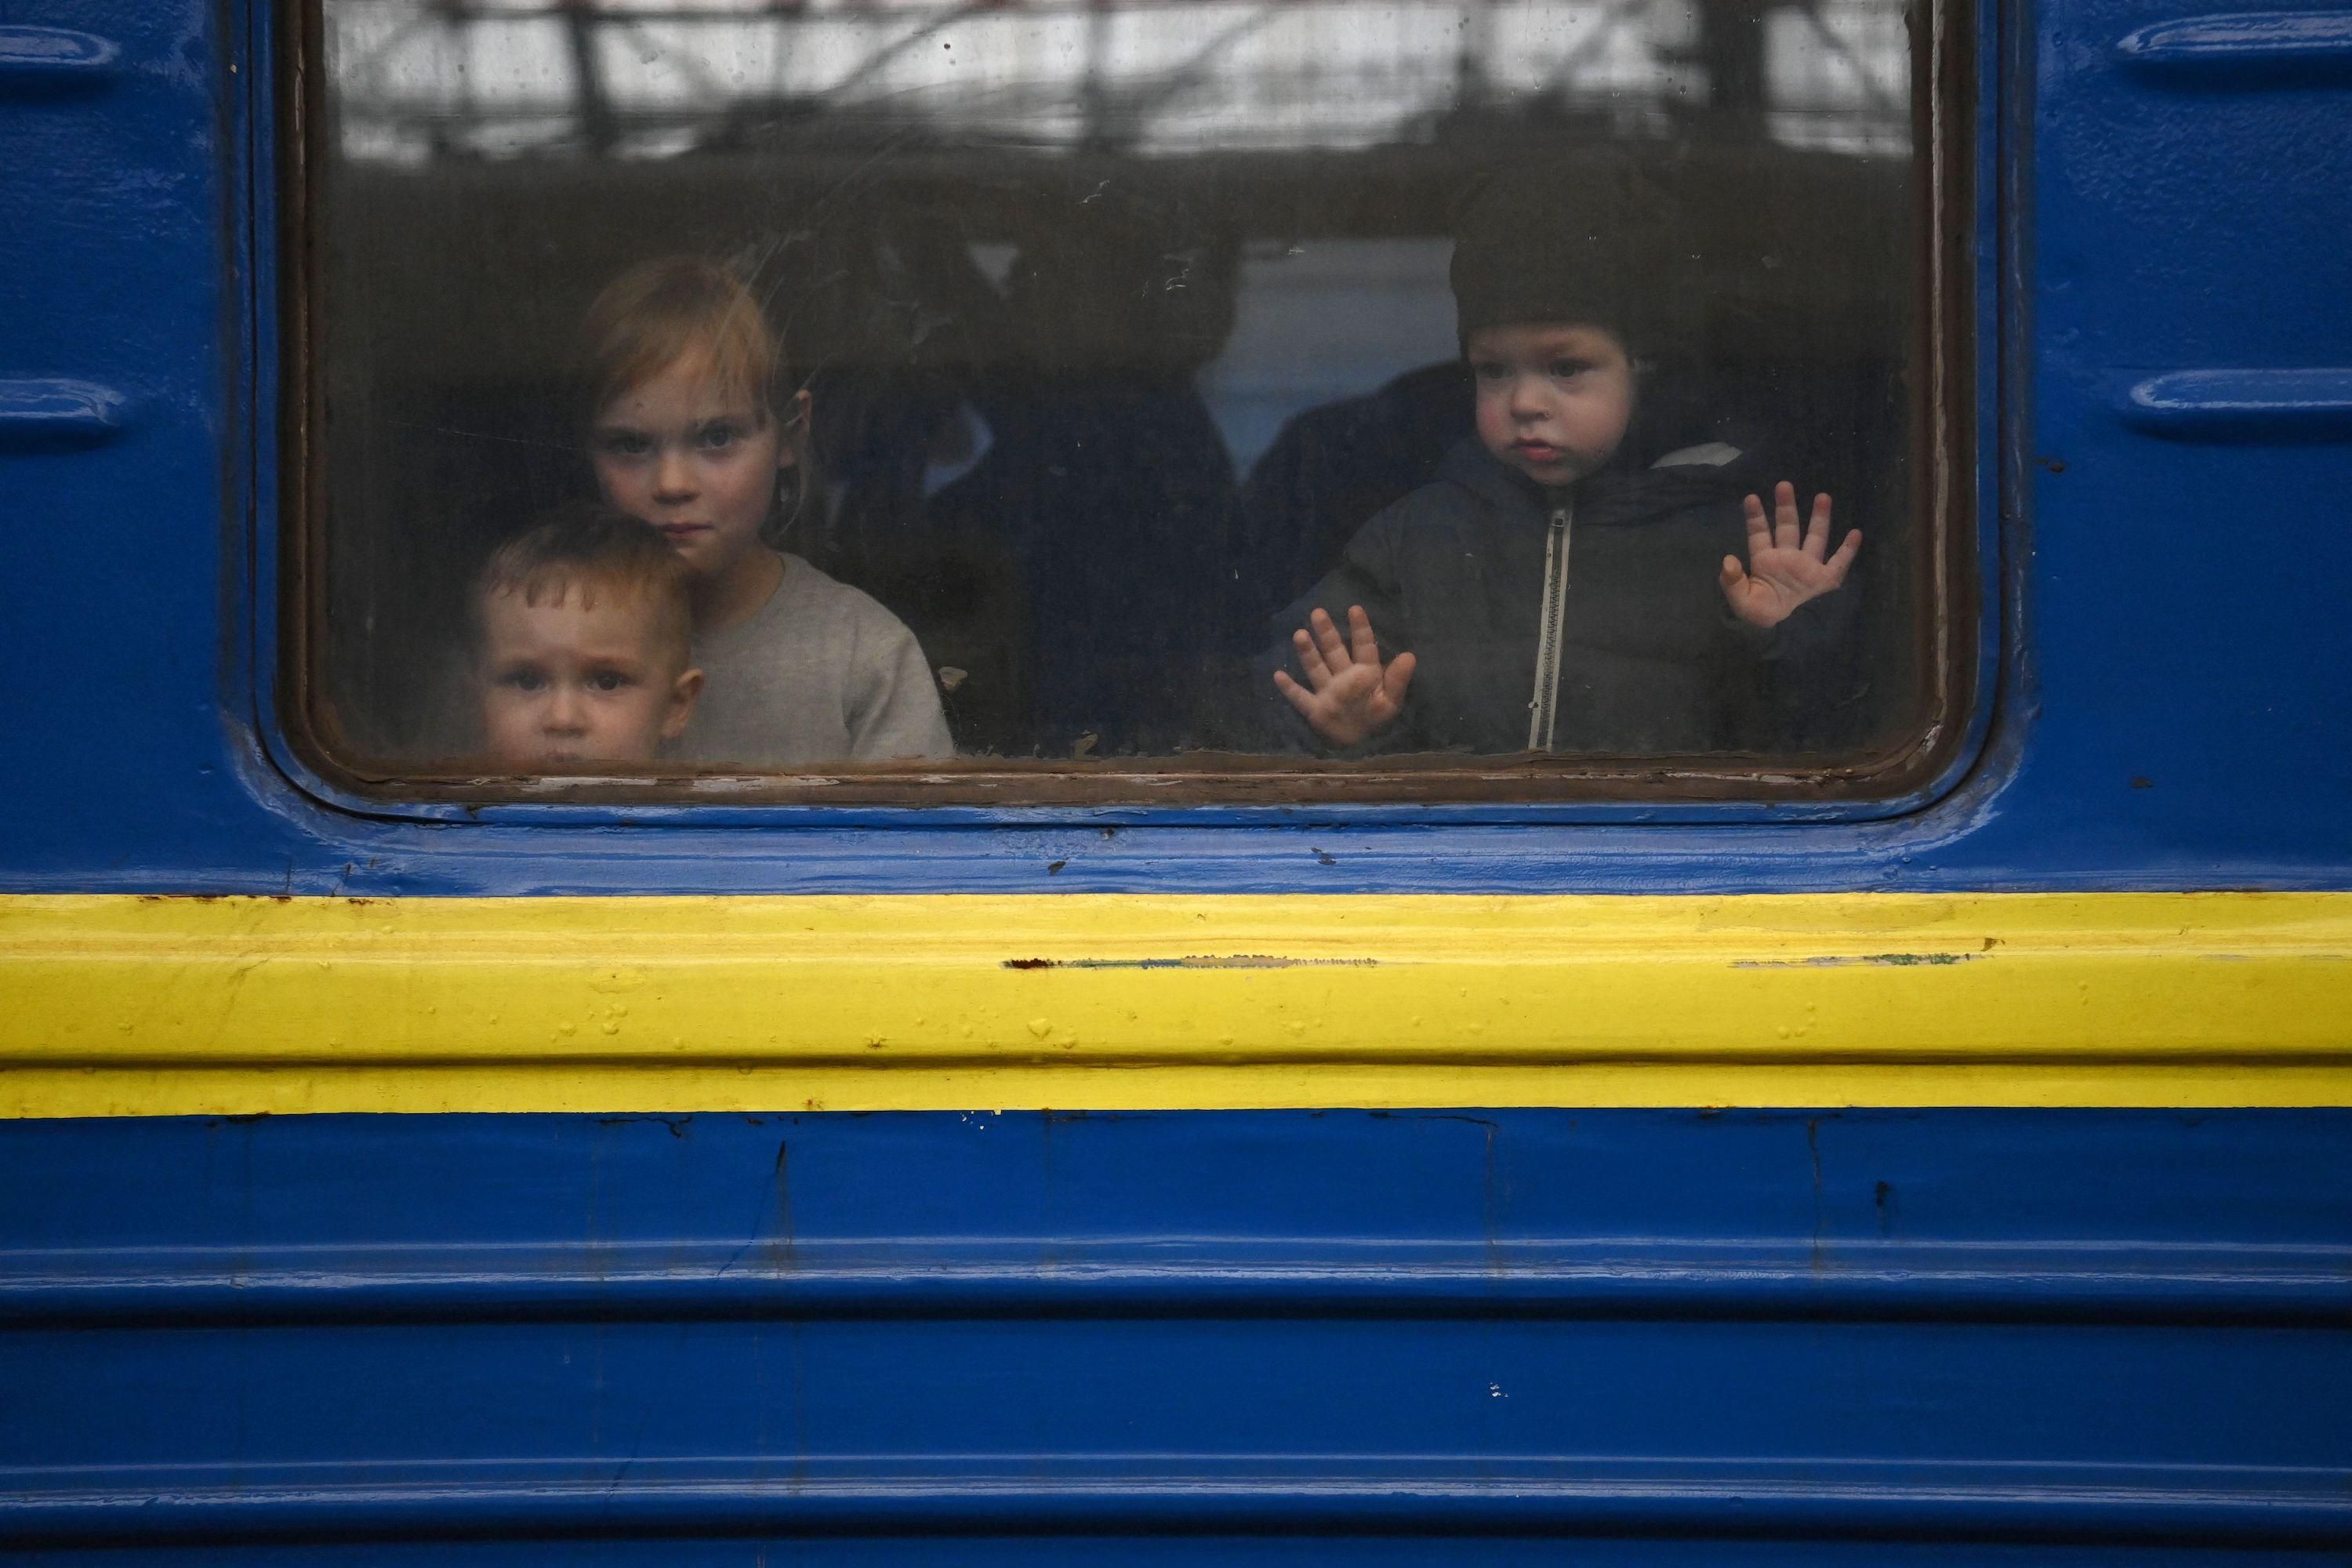 Children look out from a carriage window as a train prepares to depart from a station in Lviv, western Ukraine, en route to the town of Uzhhorod near the border with Slovakia, on March 3, 2022. (Photo: Daniel Leal/AFP via Getty Images)